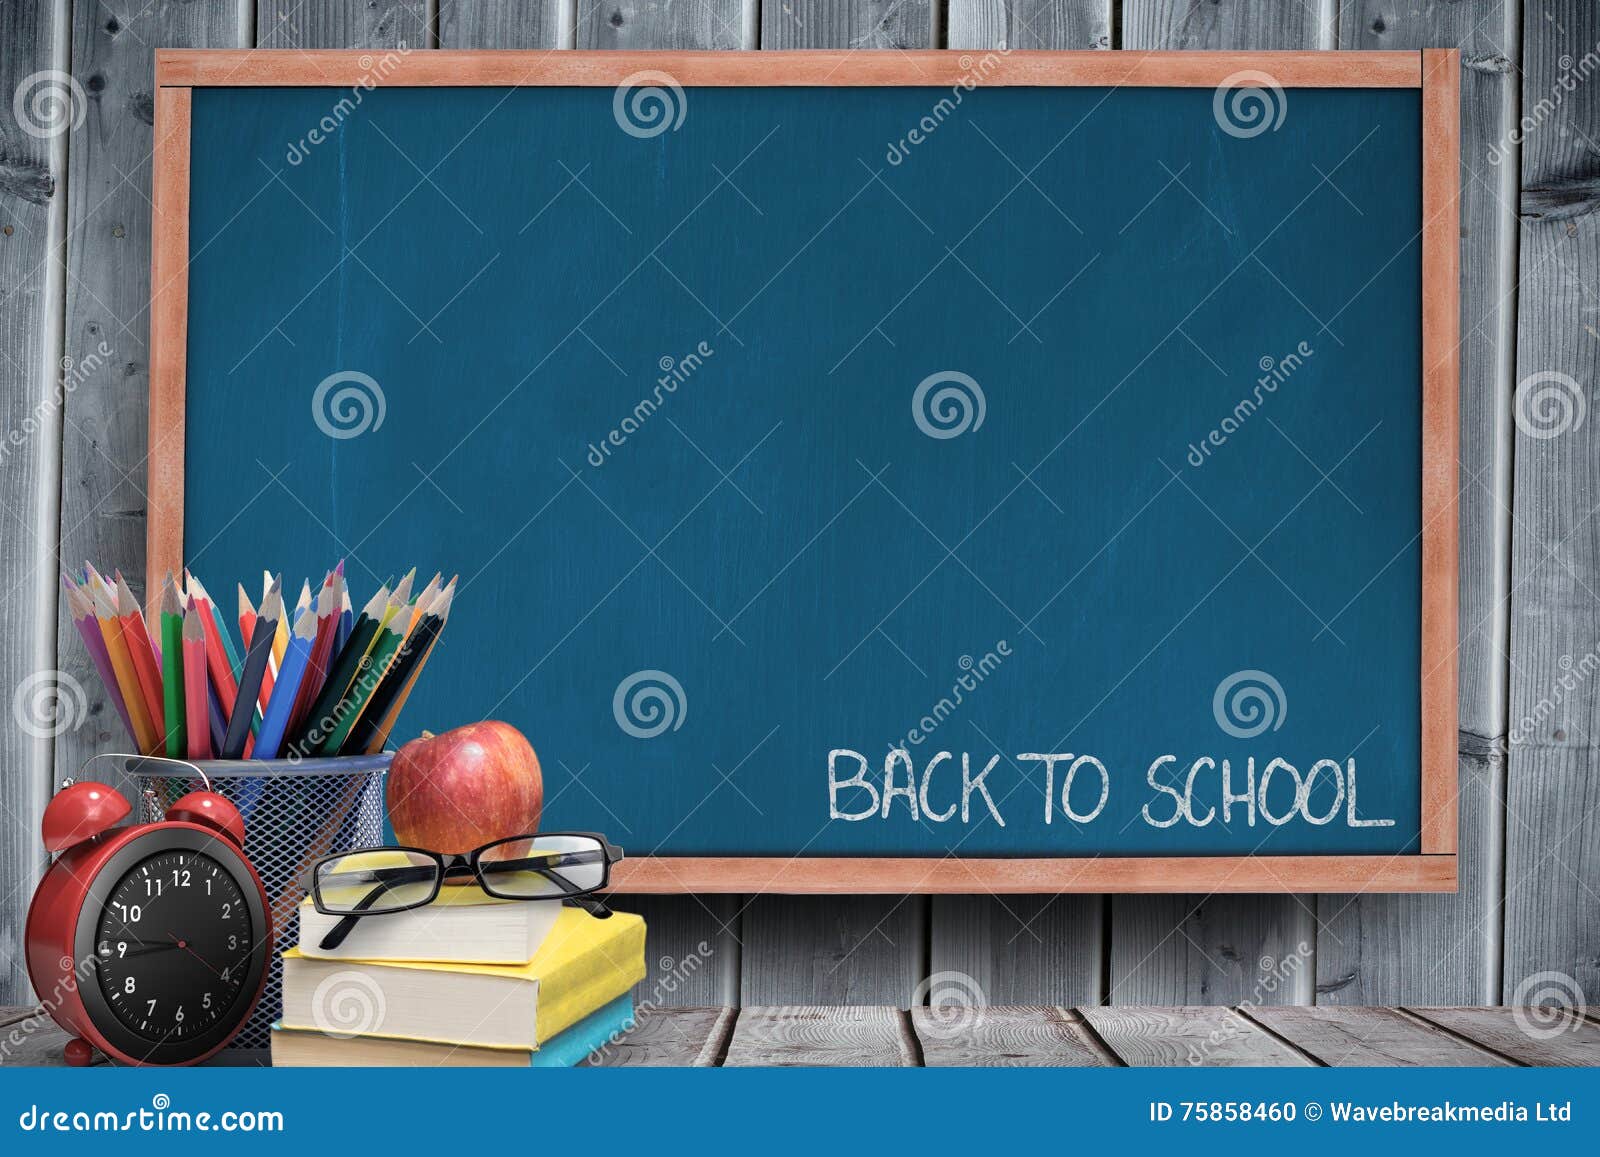 composite image of back to school message